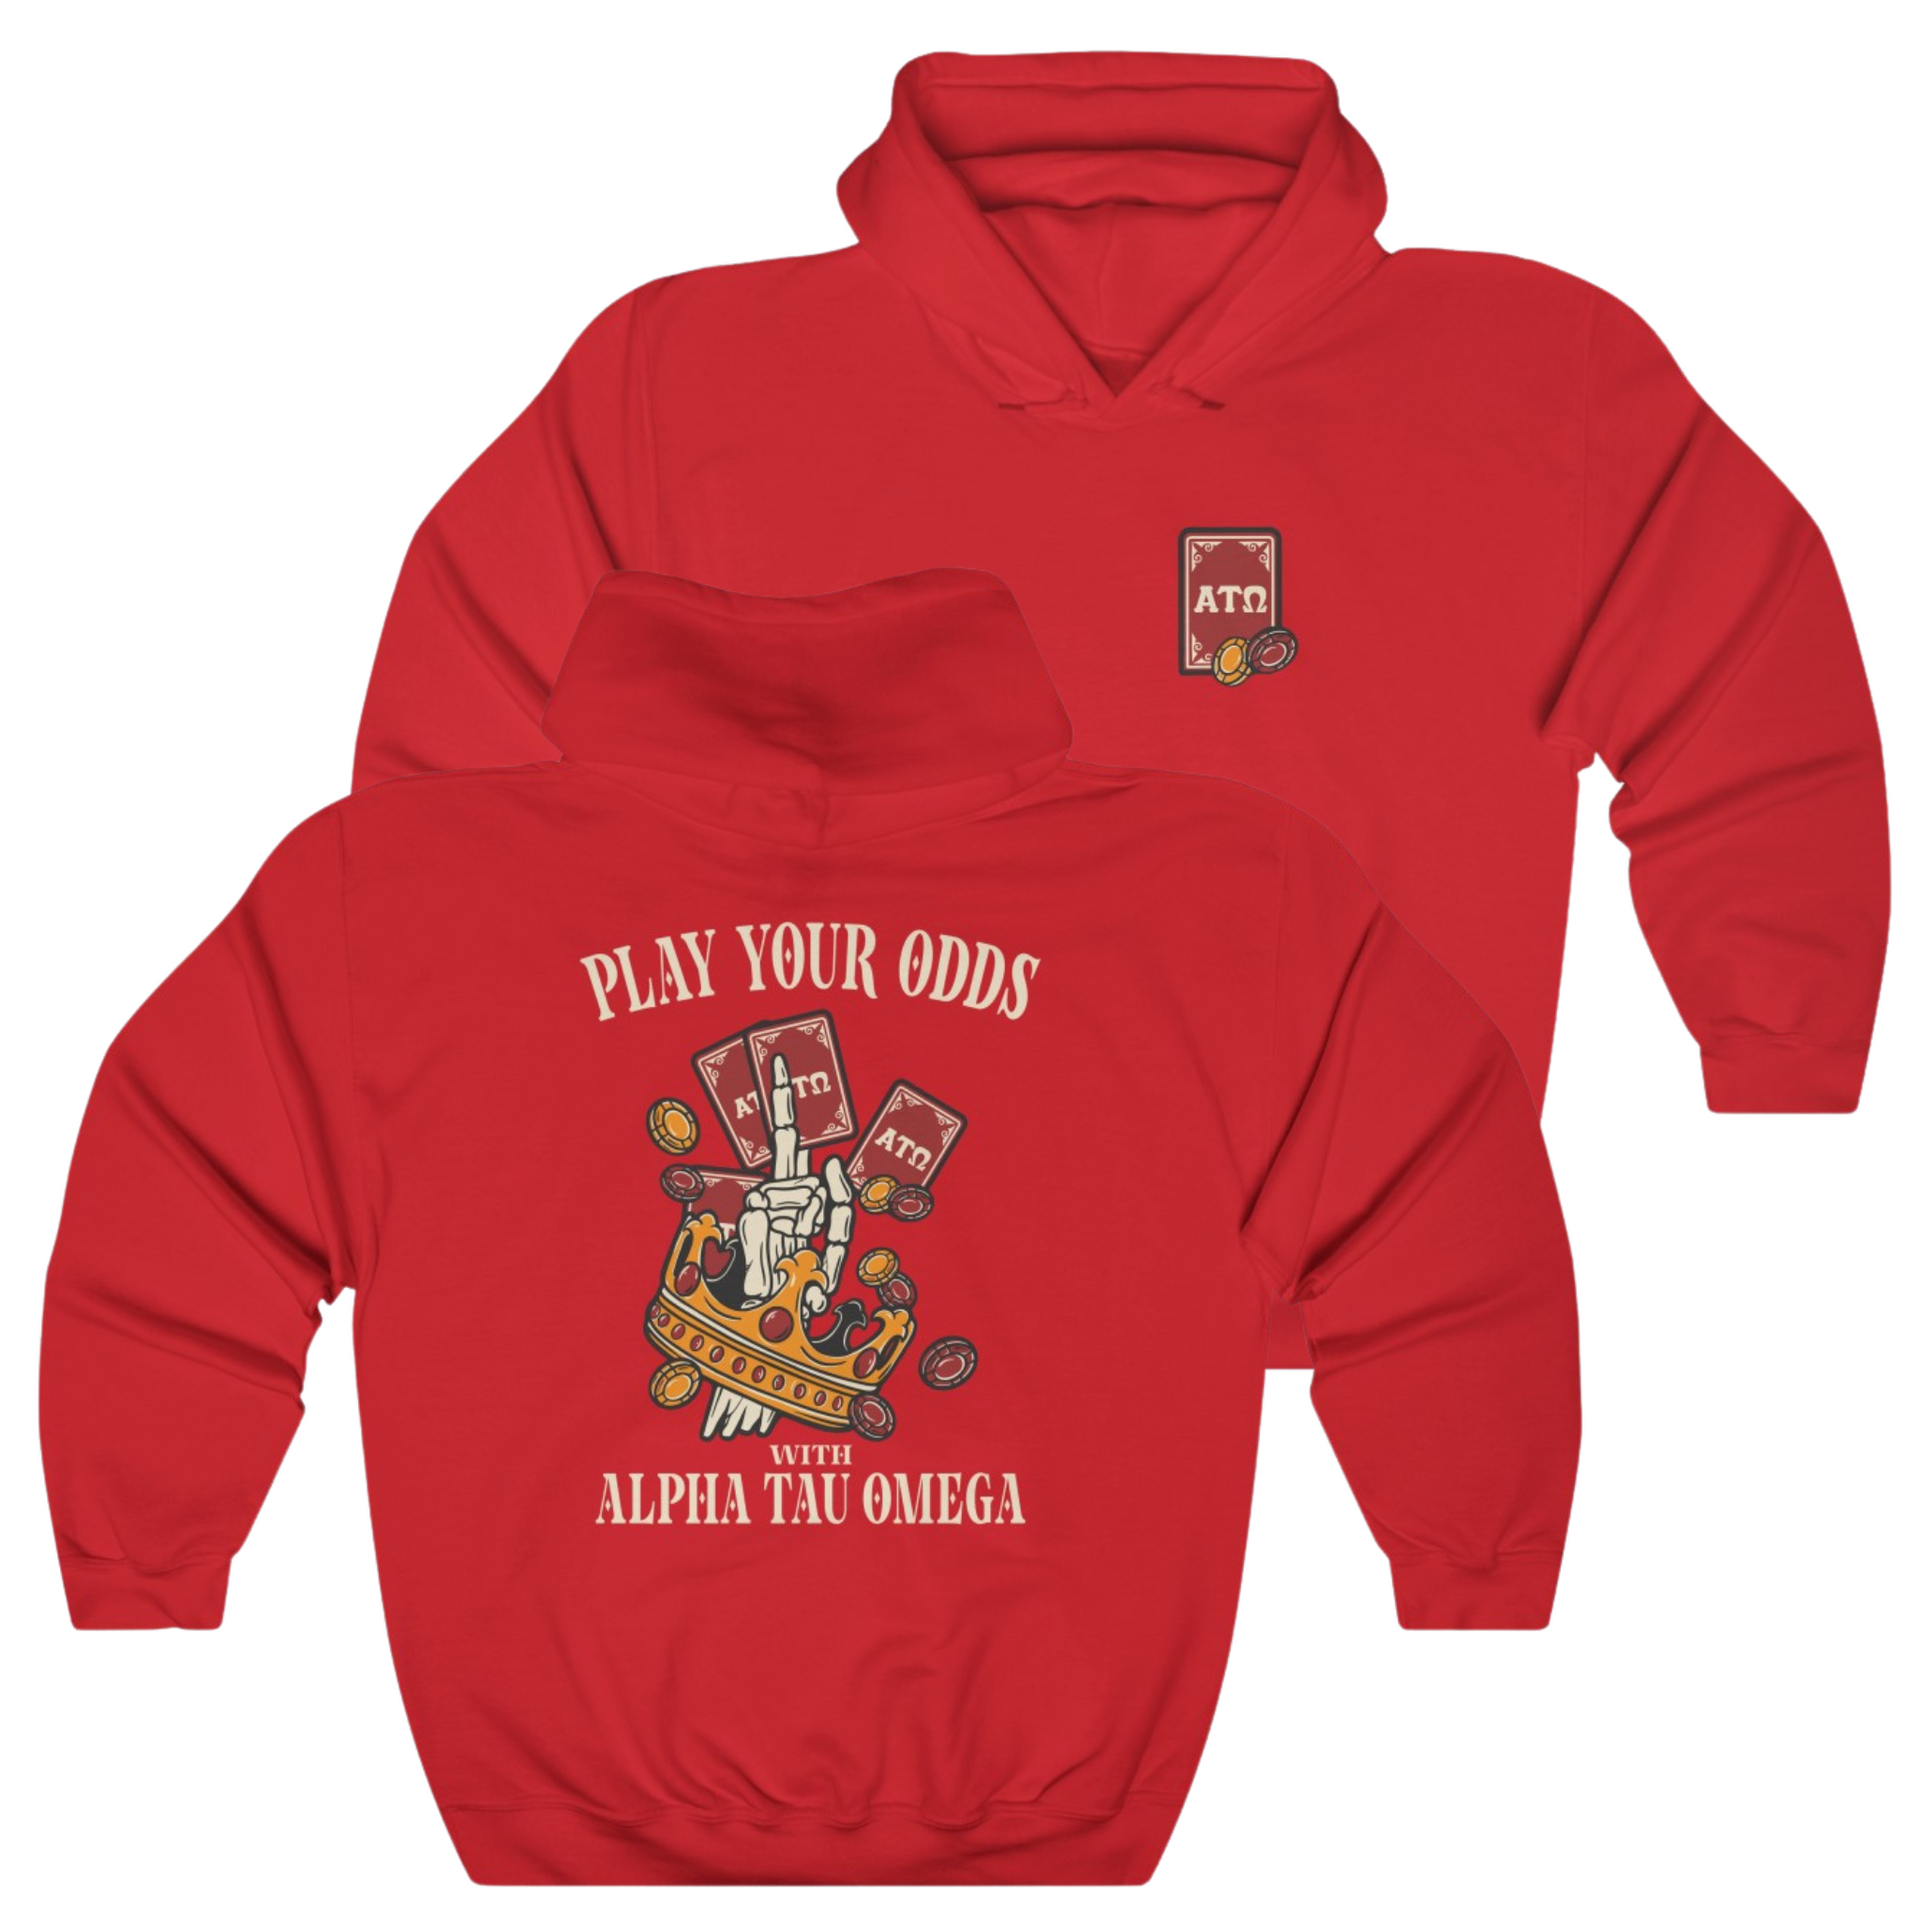 Red Alpha Tau Omega Graphic Hoodie | Play Your Odds | Alpha Tau Omega Fraternity Merchandise 